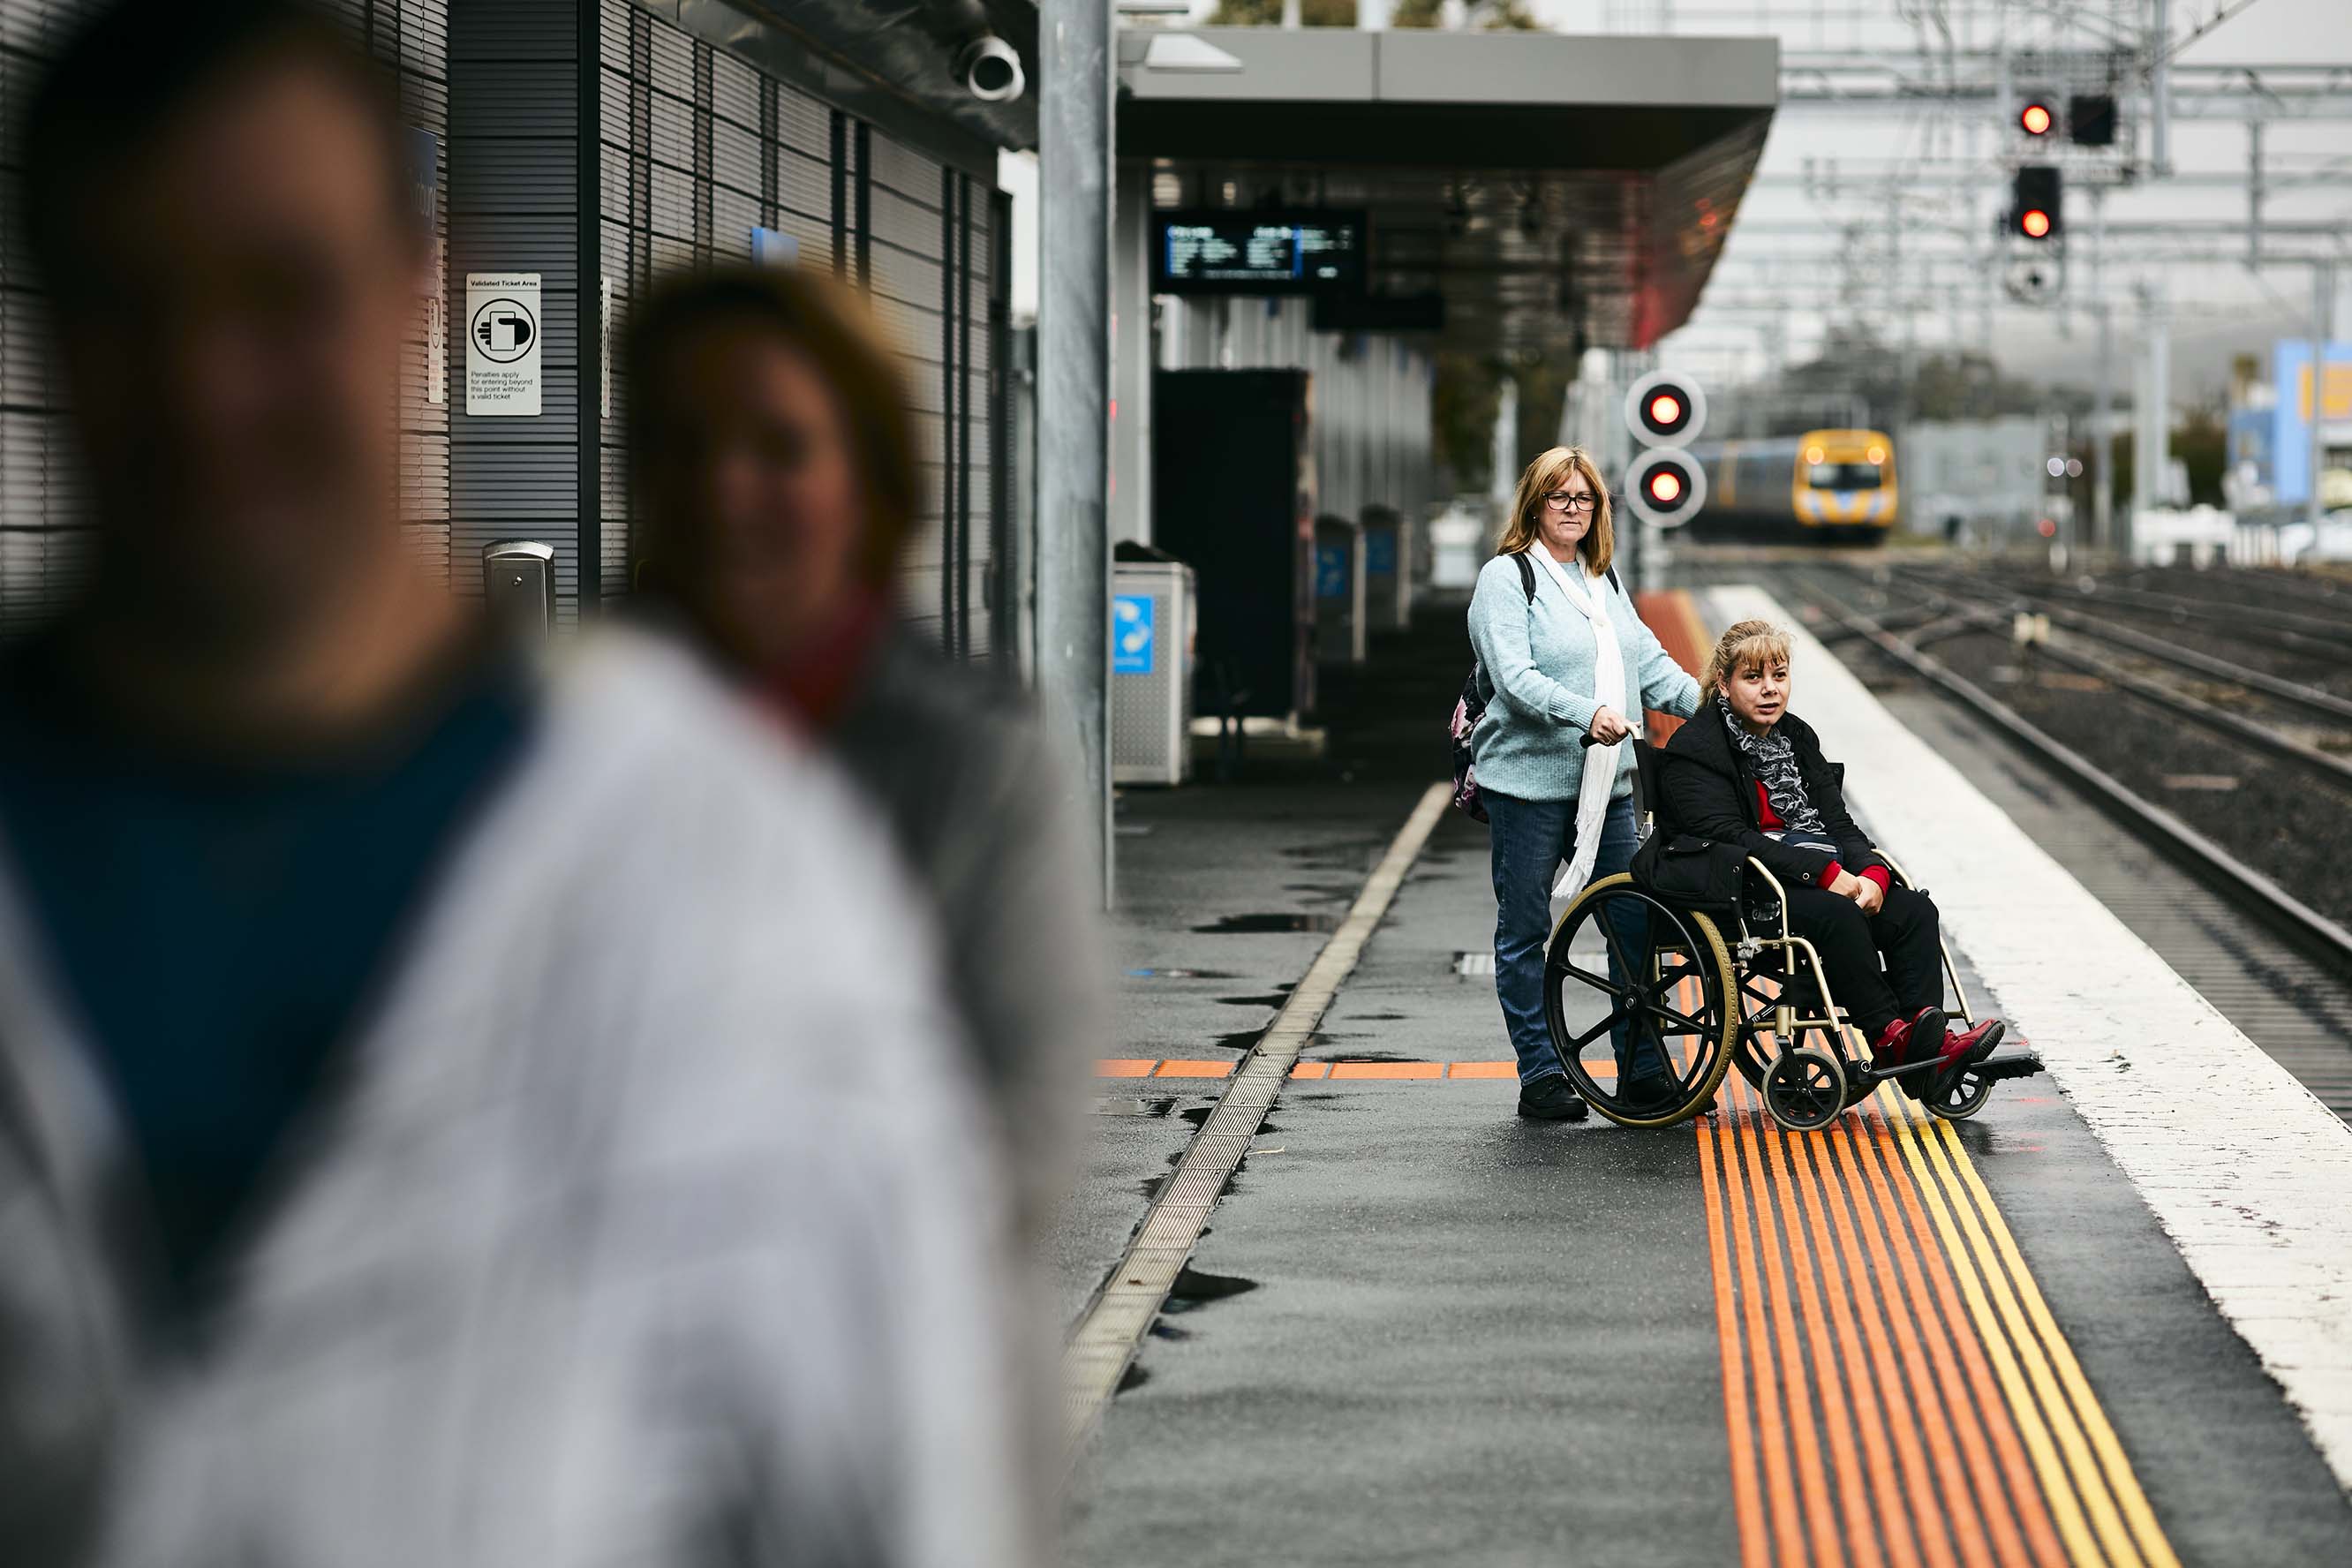 Image shows a person in a wheelchair with their carer waiting on a train station platform.